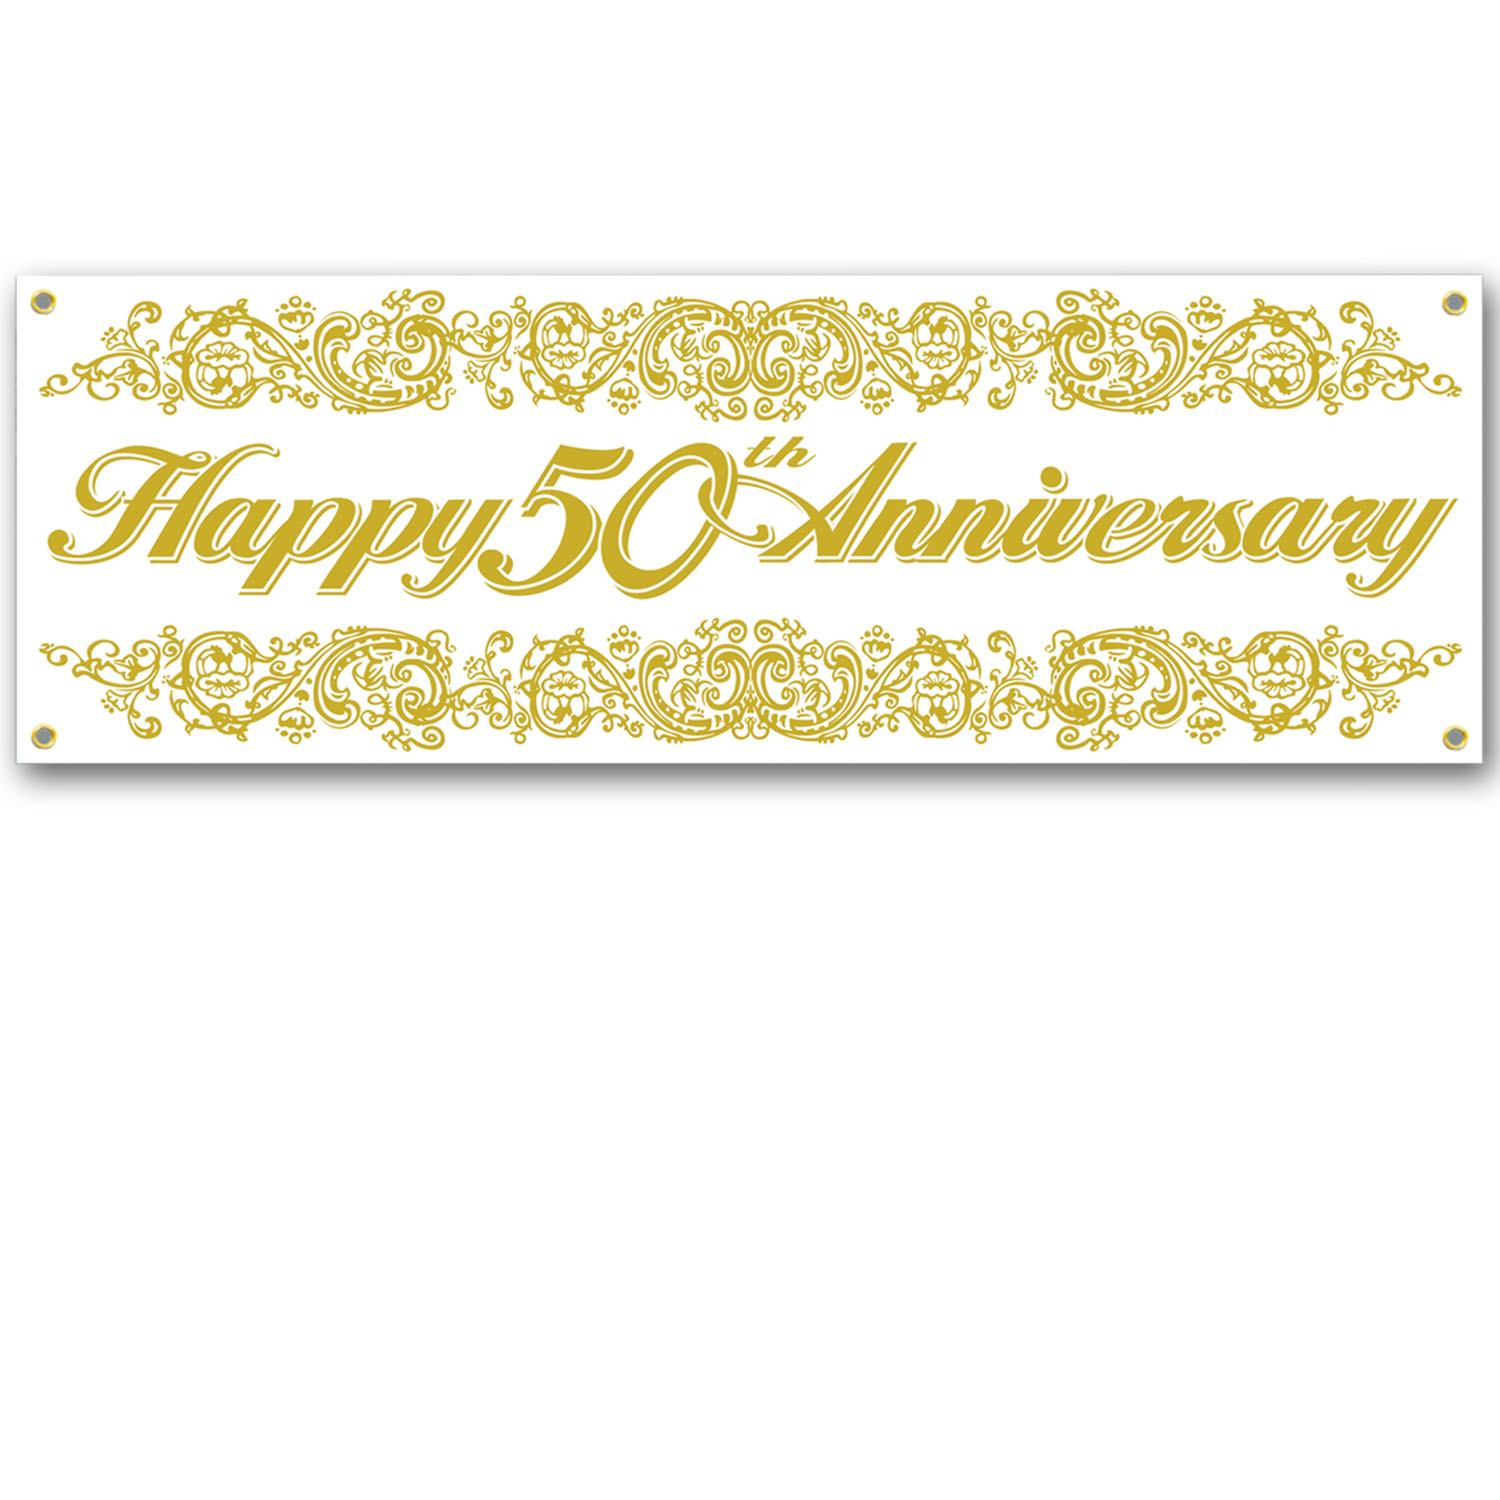 ''''''''''50th'''''''''''''''' Anniversary SIGN Banner''''''''''